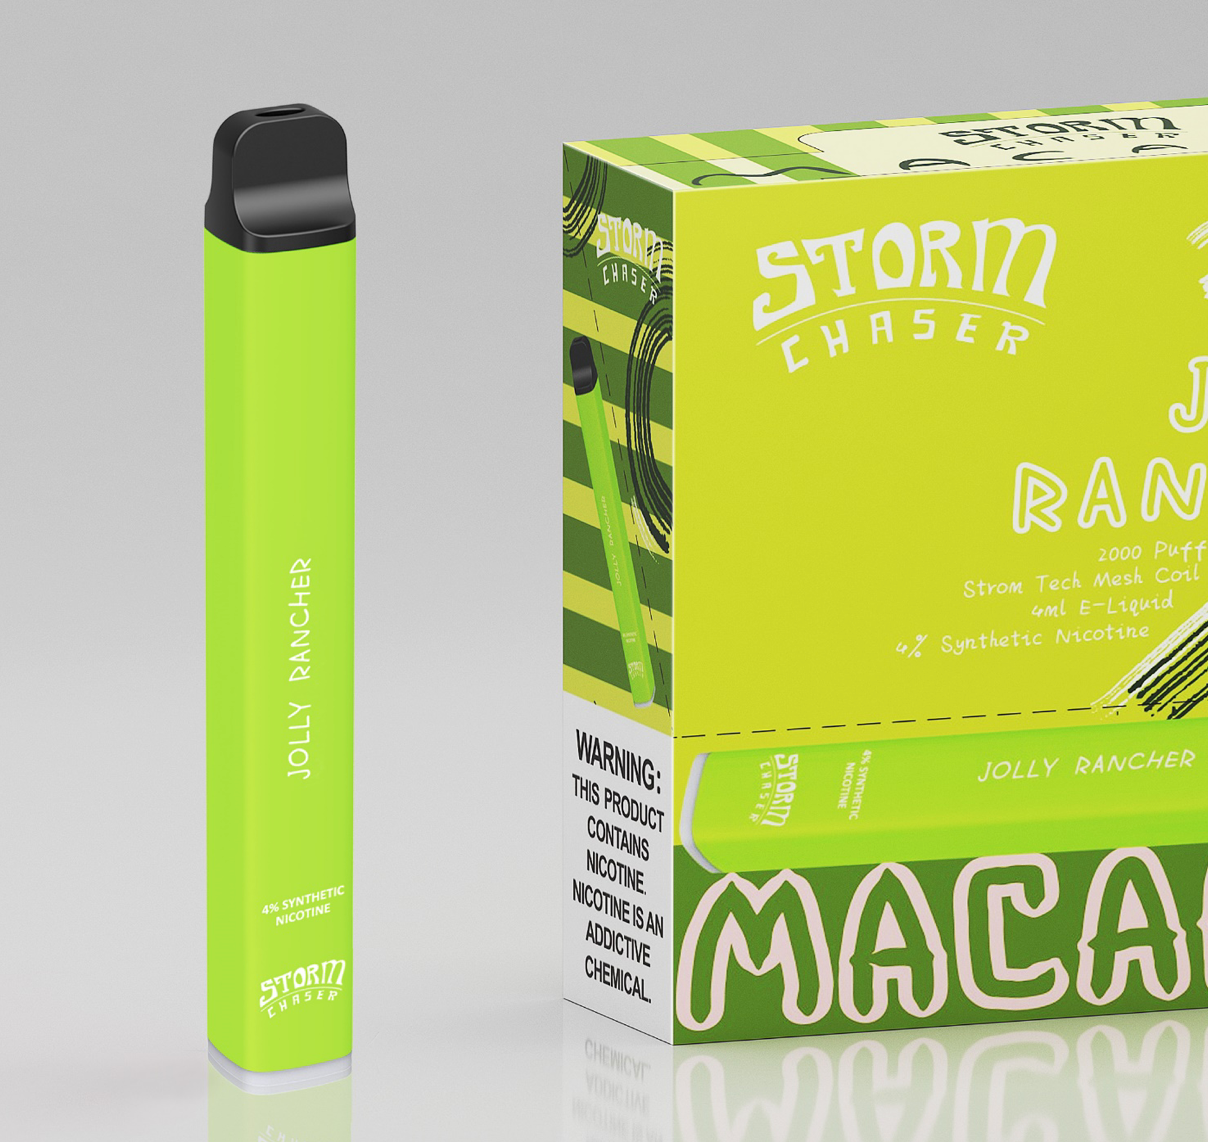 STORM CHASER  Macaron  2000 puffs  Disposable Devices - Storm Chaser